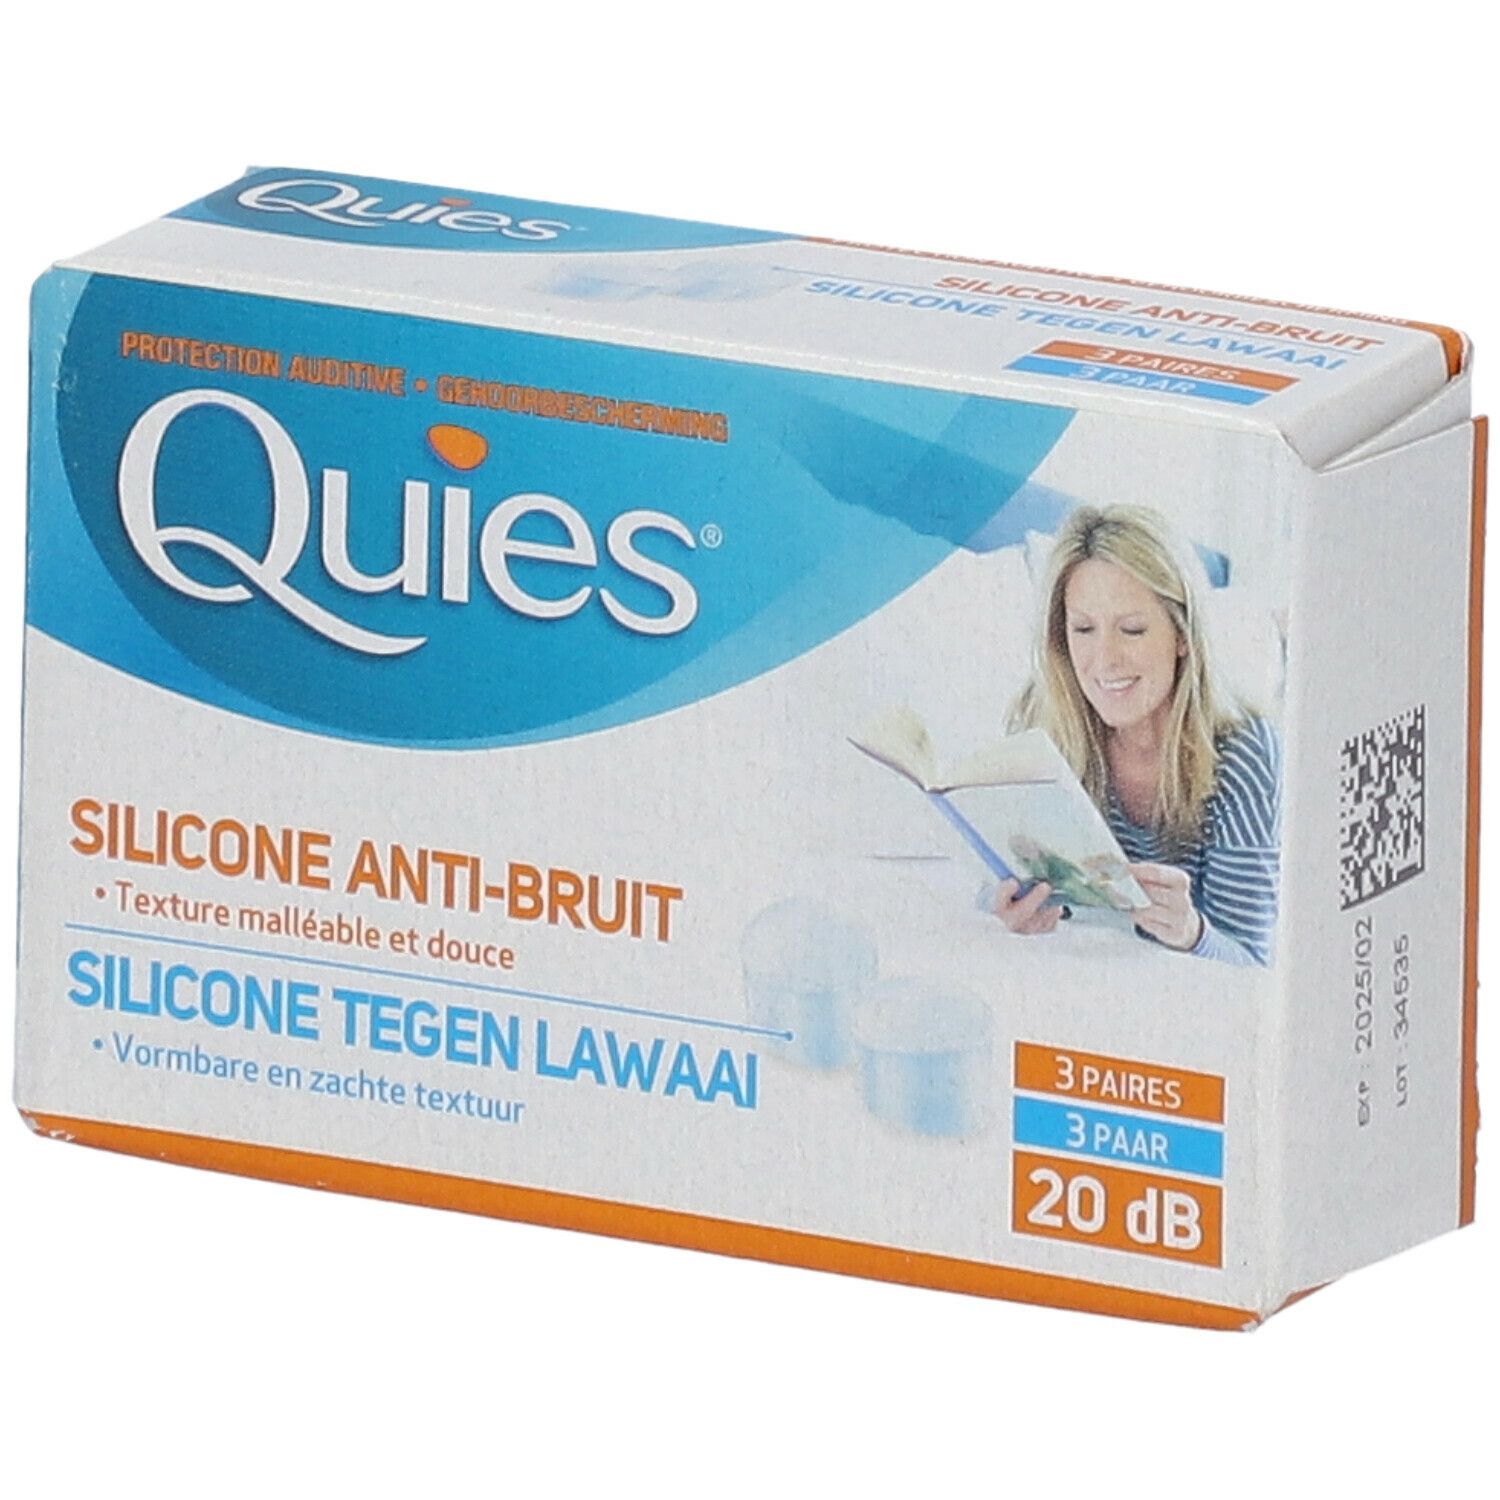 Quies® Protection auditive en silicone translucide 3 pc(s) - Redcare  Pharmacie